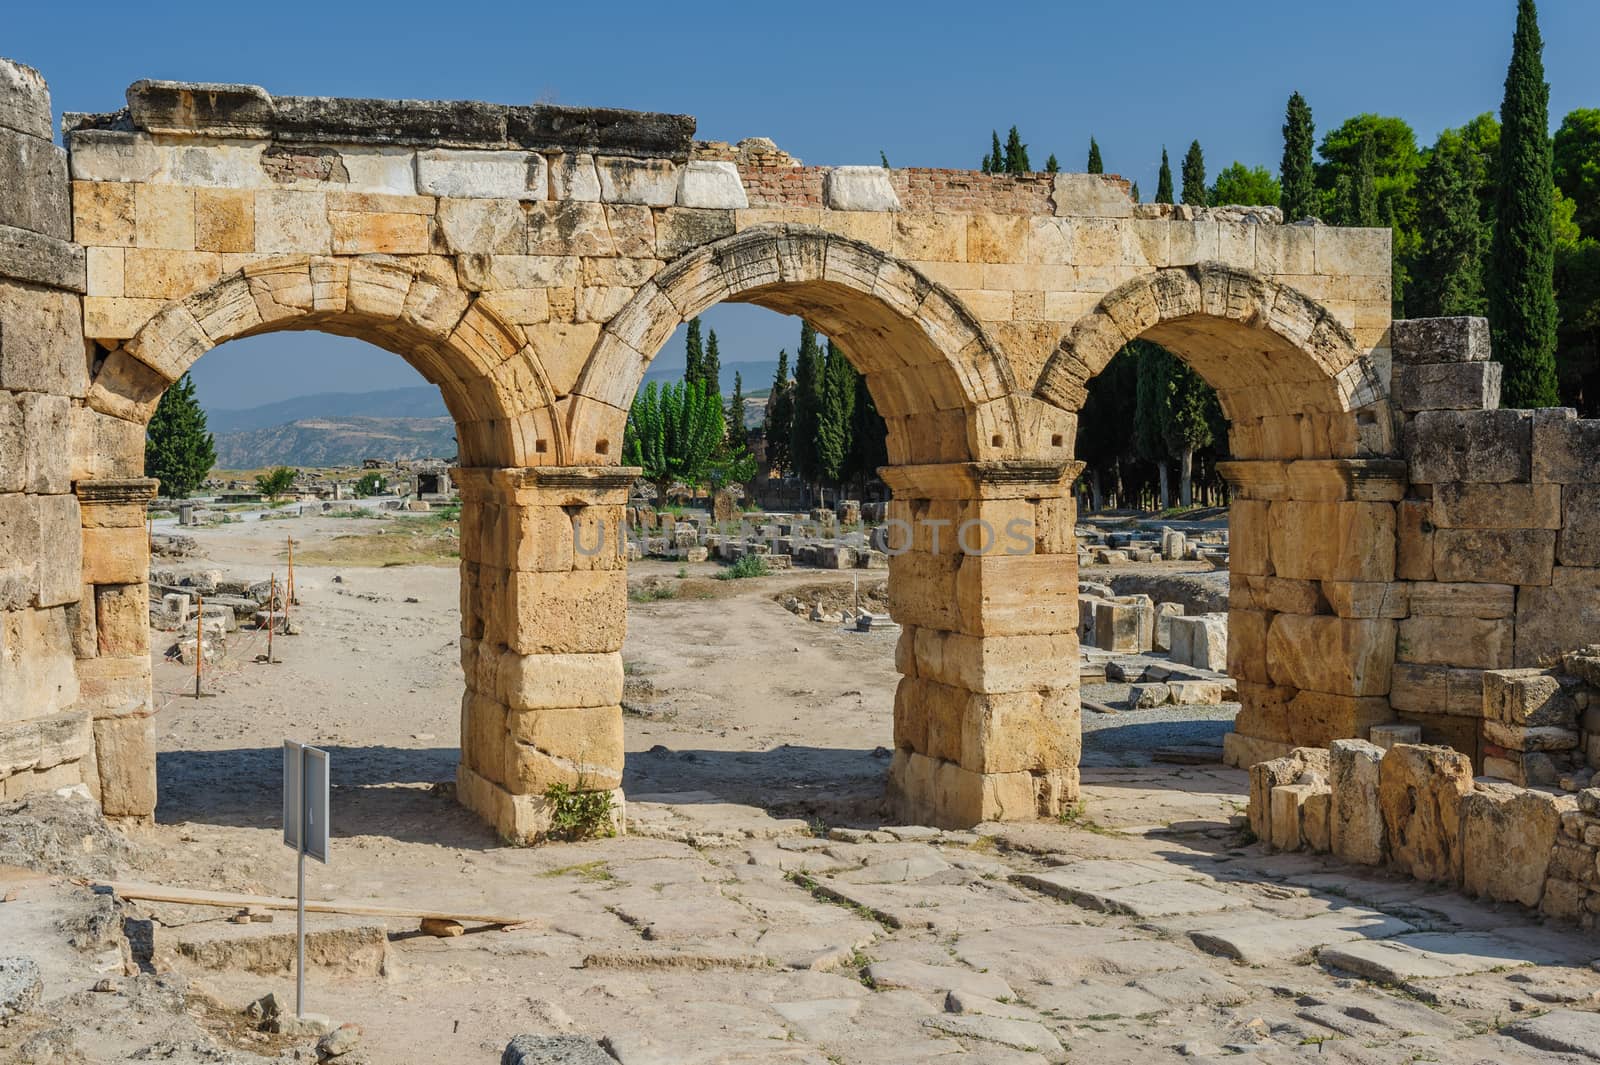 Ruins of Hierapolis, now Pamukkale by starush